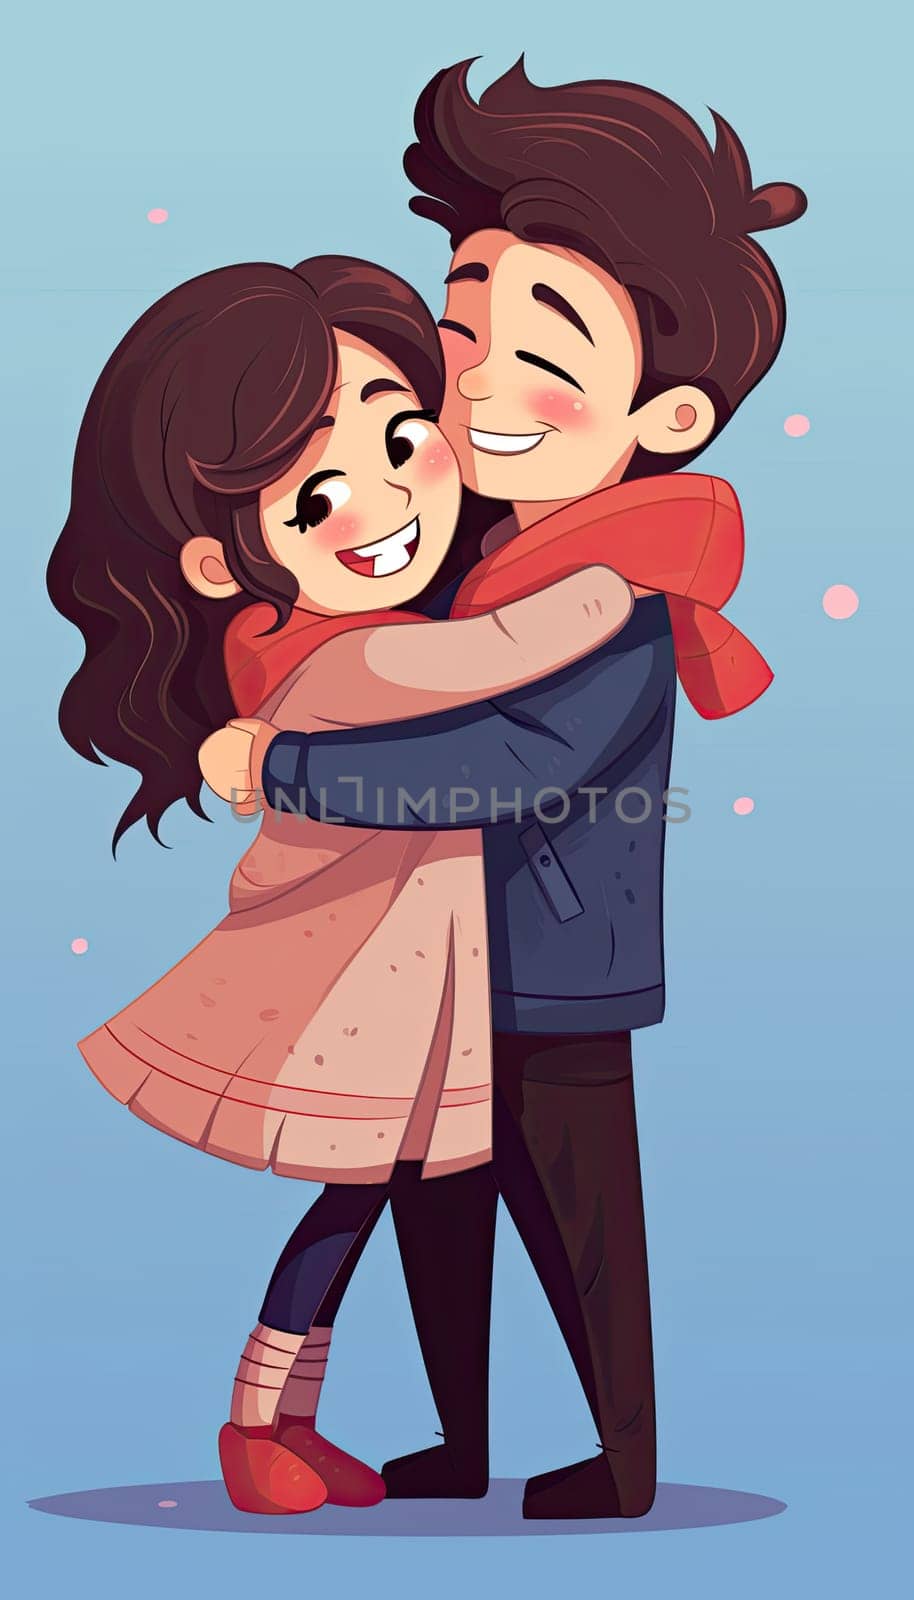 Couple in love. Boy and girl embracing each other. Saint Valentine illustration in cartoon style by papatonic